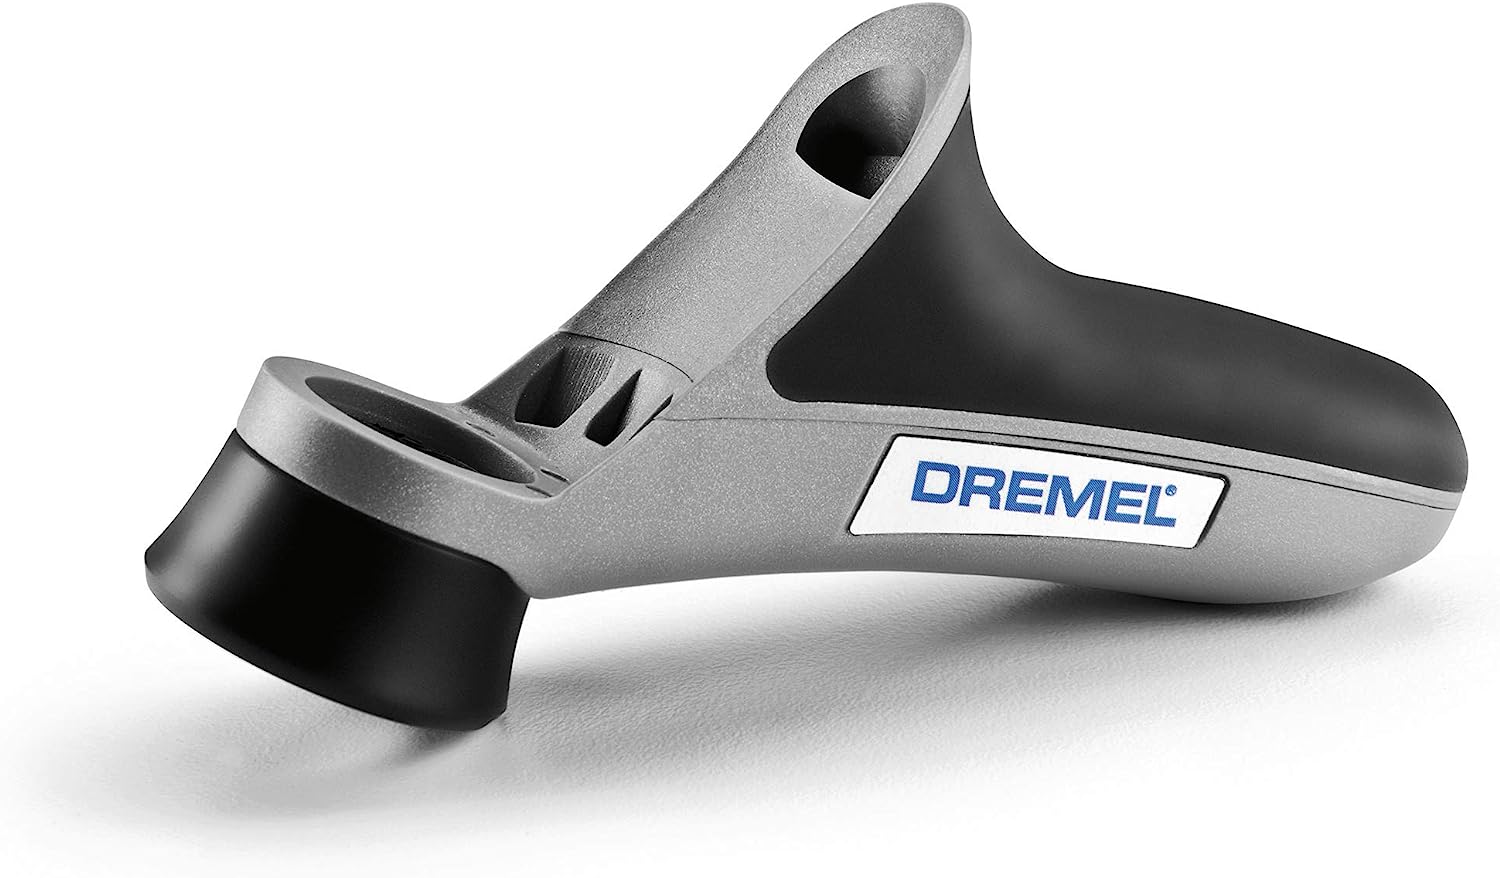 Dremel A577 Detailers Grip Rotary Tool Attachment - [...]